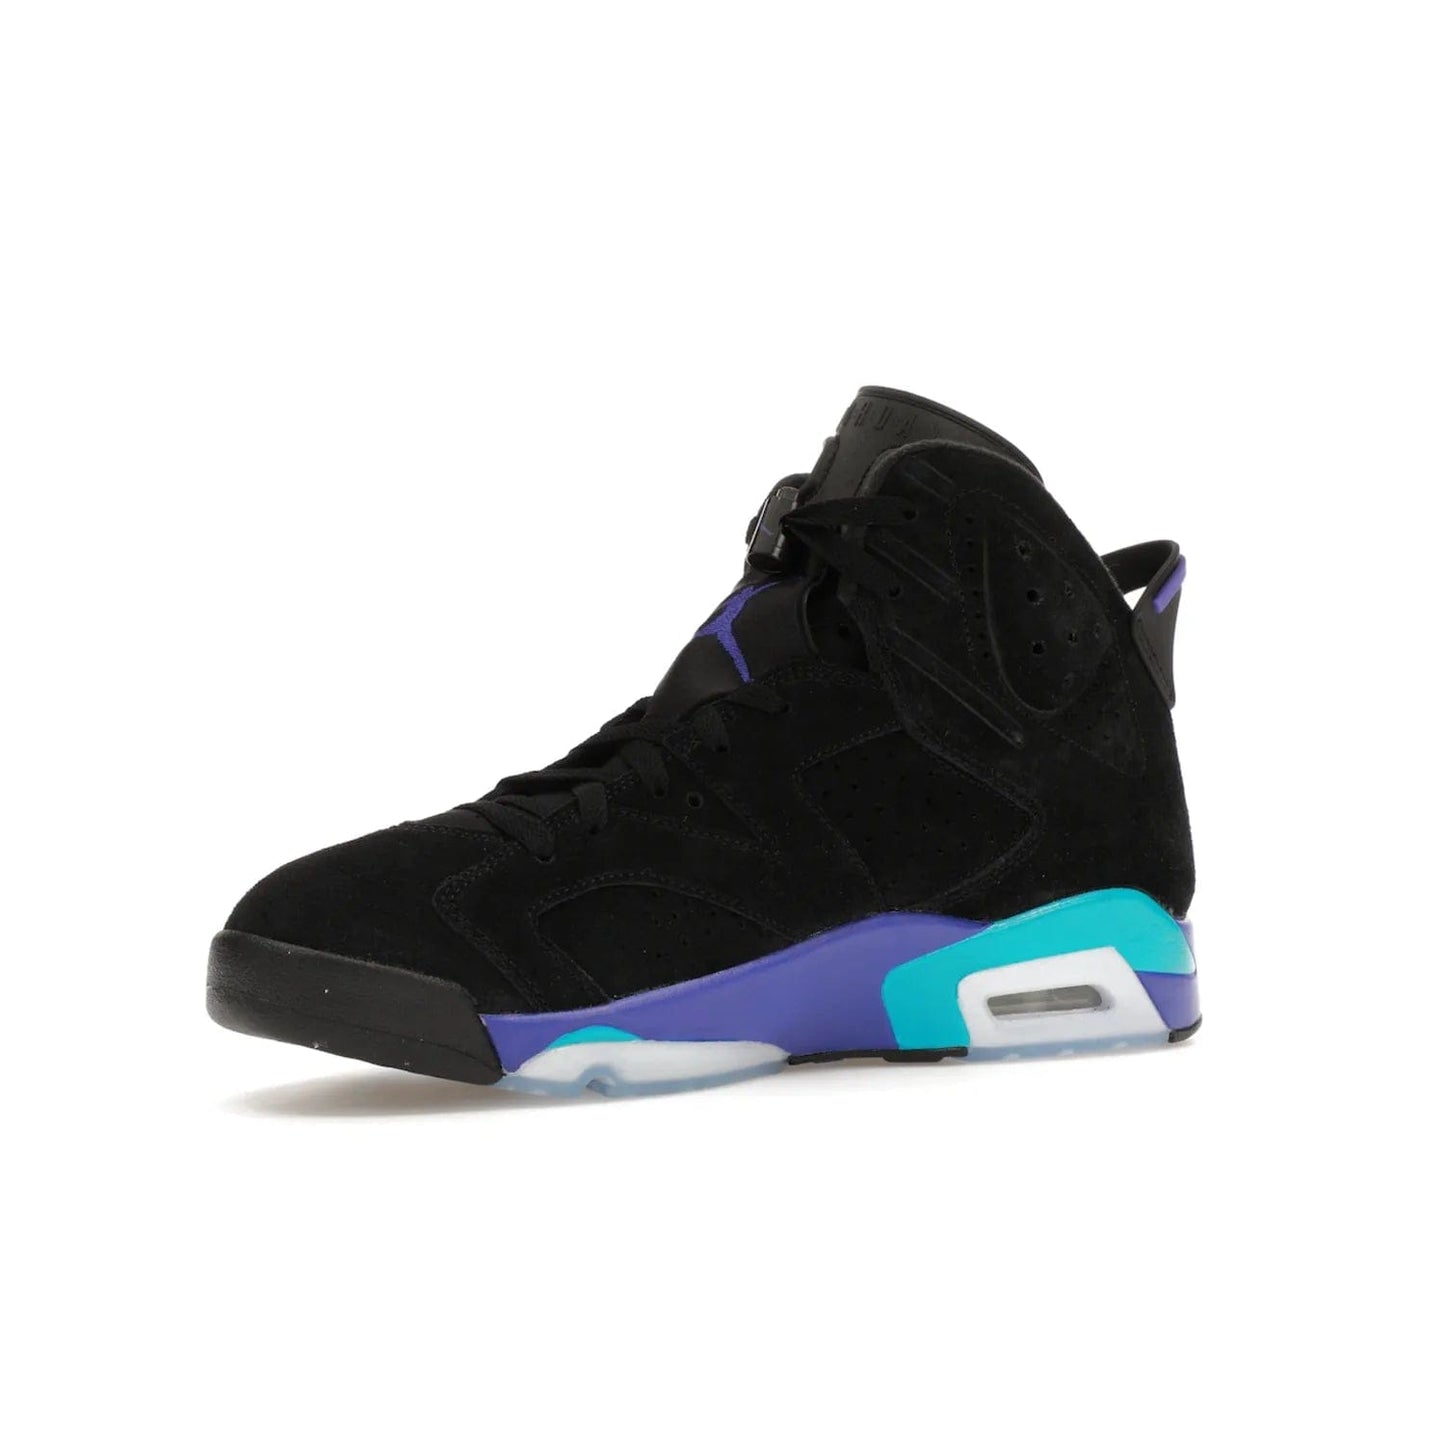 Jordan 6 Retro Aqua - Image 16 - Only at www.BallersClubKickz.com - Feel the classic Jordan 6 Retro Aqua paired with modern style. Black, Bright Concord, and Aquatone hues are crafted with a supple suede and rubberized heel tab. This standout sneaker adds signature Jordan elements at $200. Elevate your style with the Jordan 6 Retro Aqua.